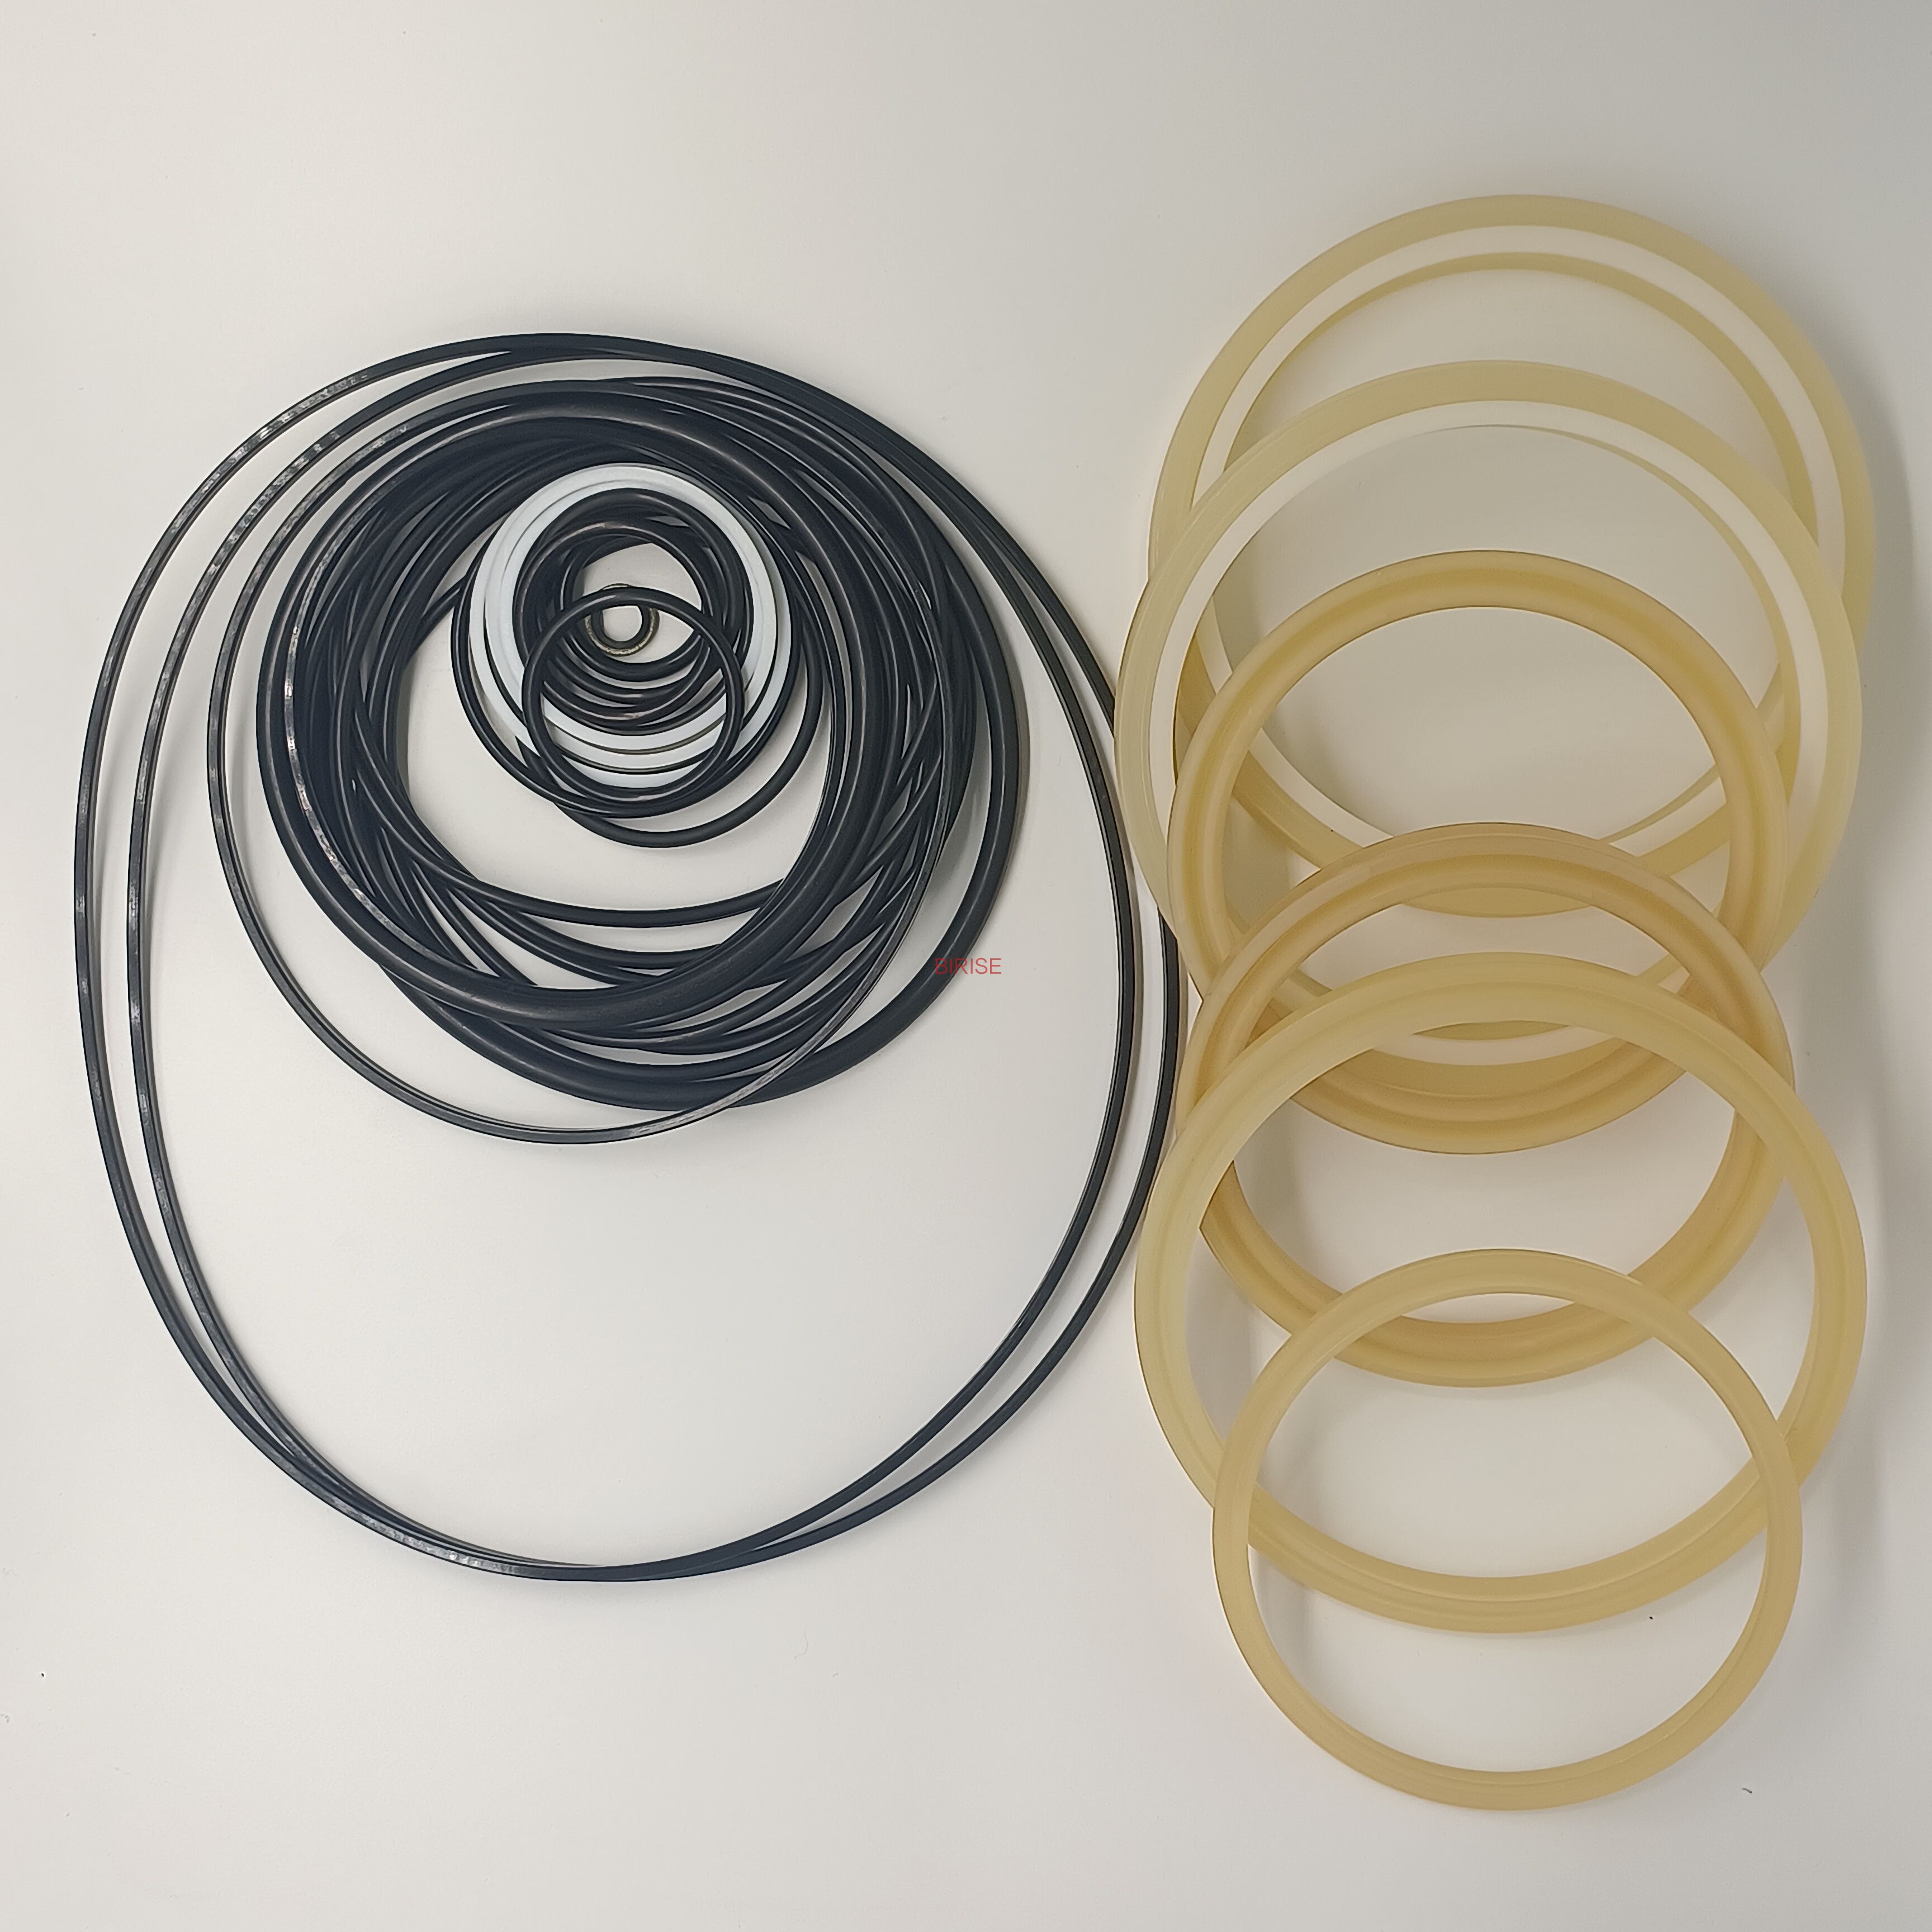 Hydraulic Breaker Seal Kits - High-Quality Replacement Seal Kits for Your Hydraulic Components